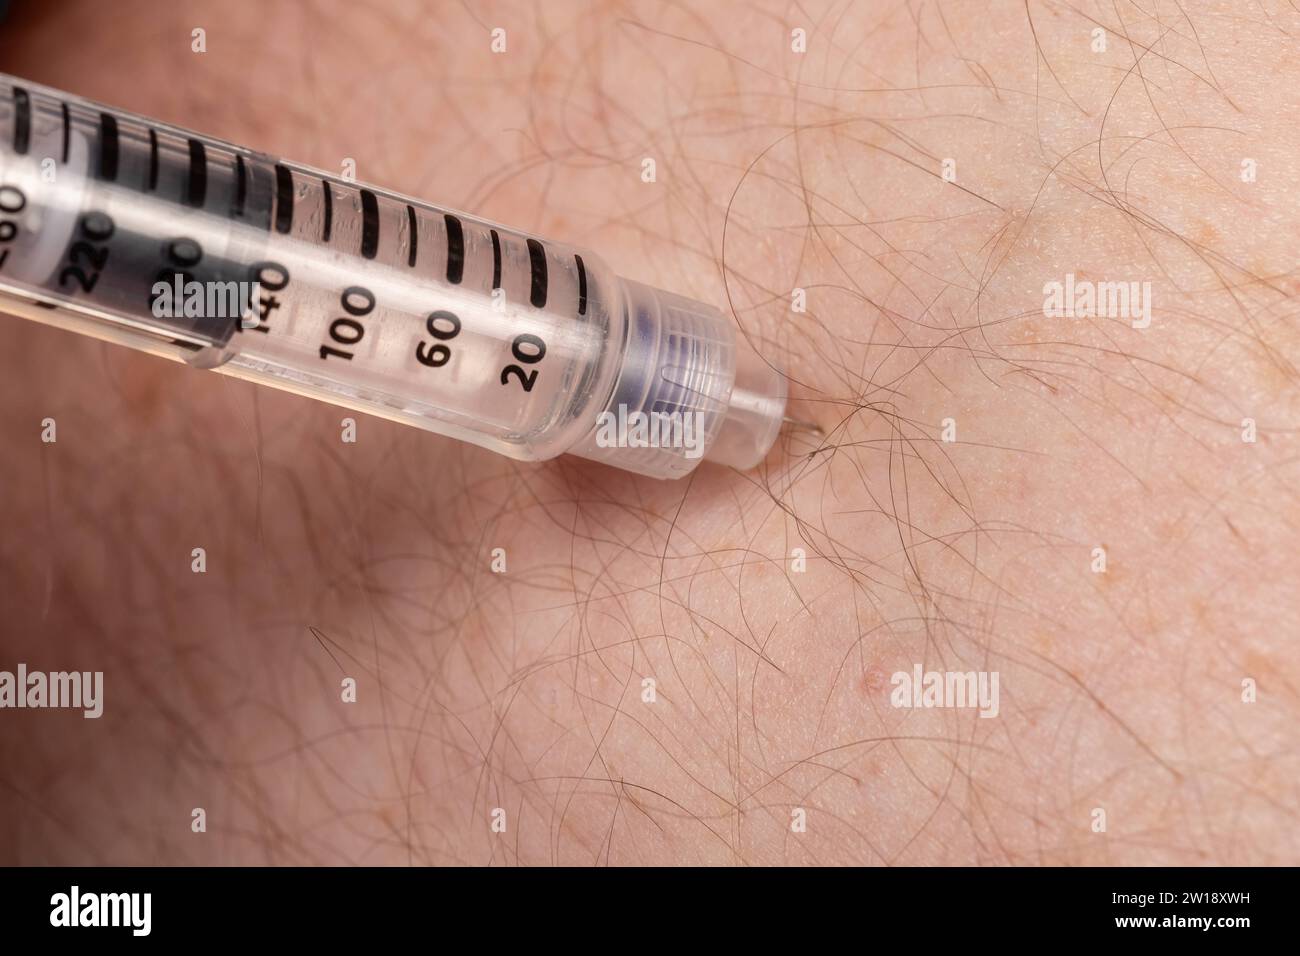 Diabetes Management: Injecting Insulin into Belly with Insulin Pen Stock Photo